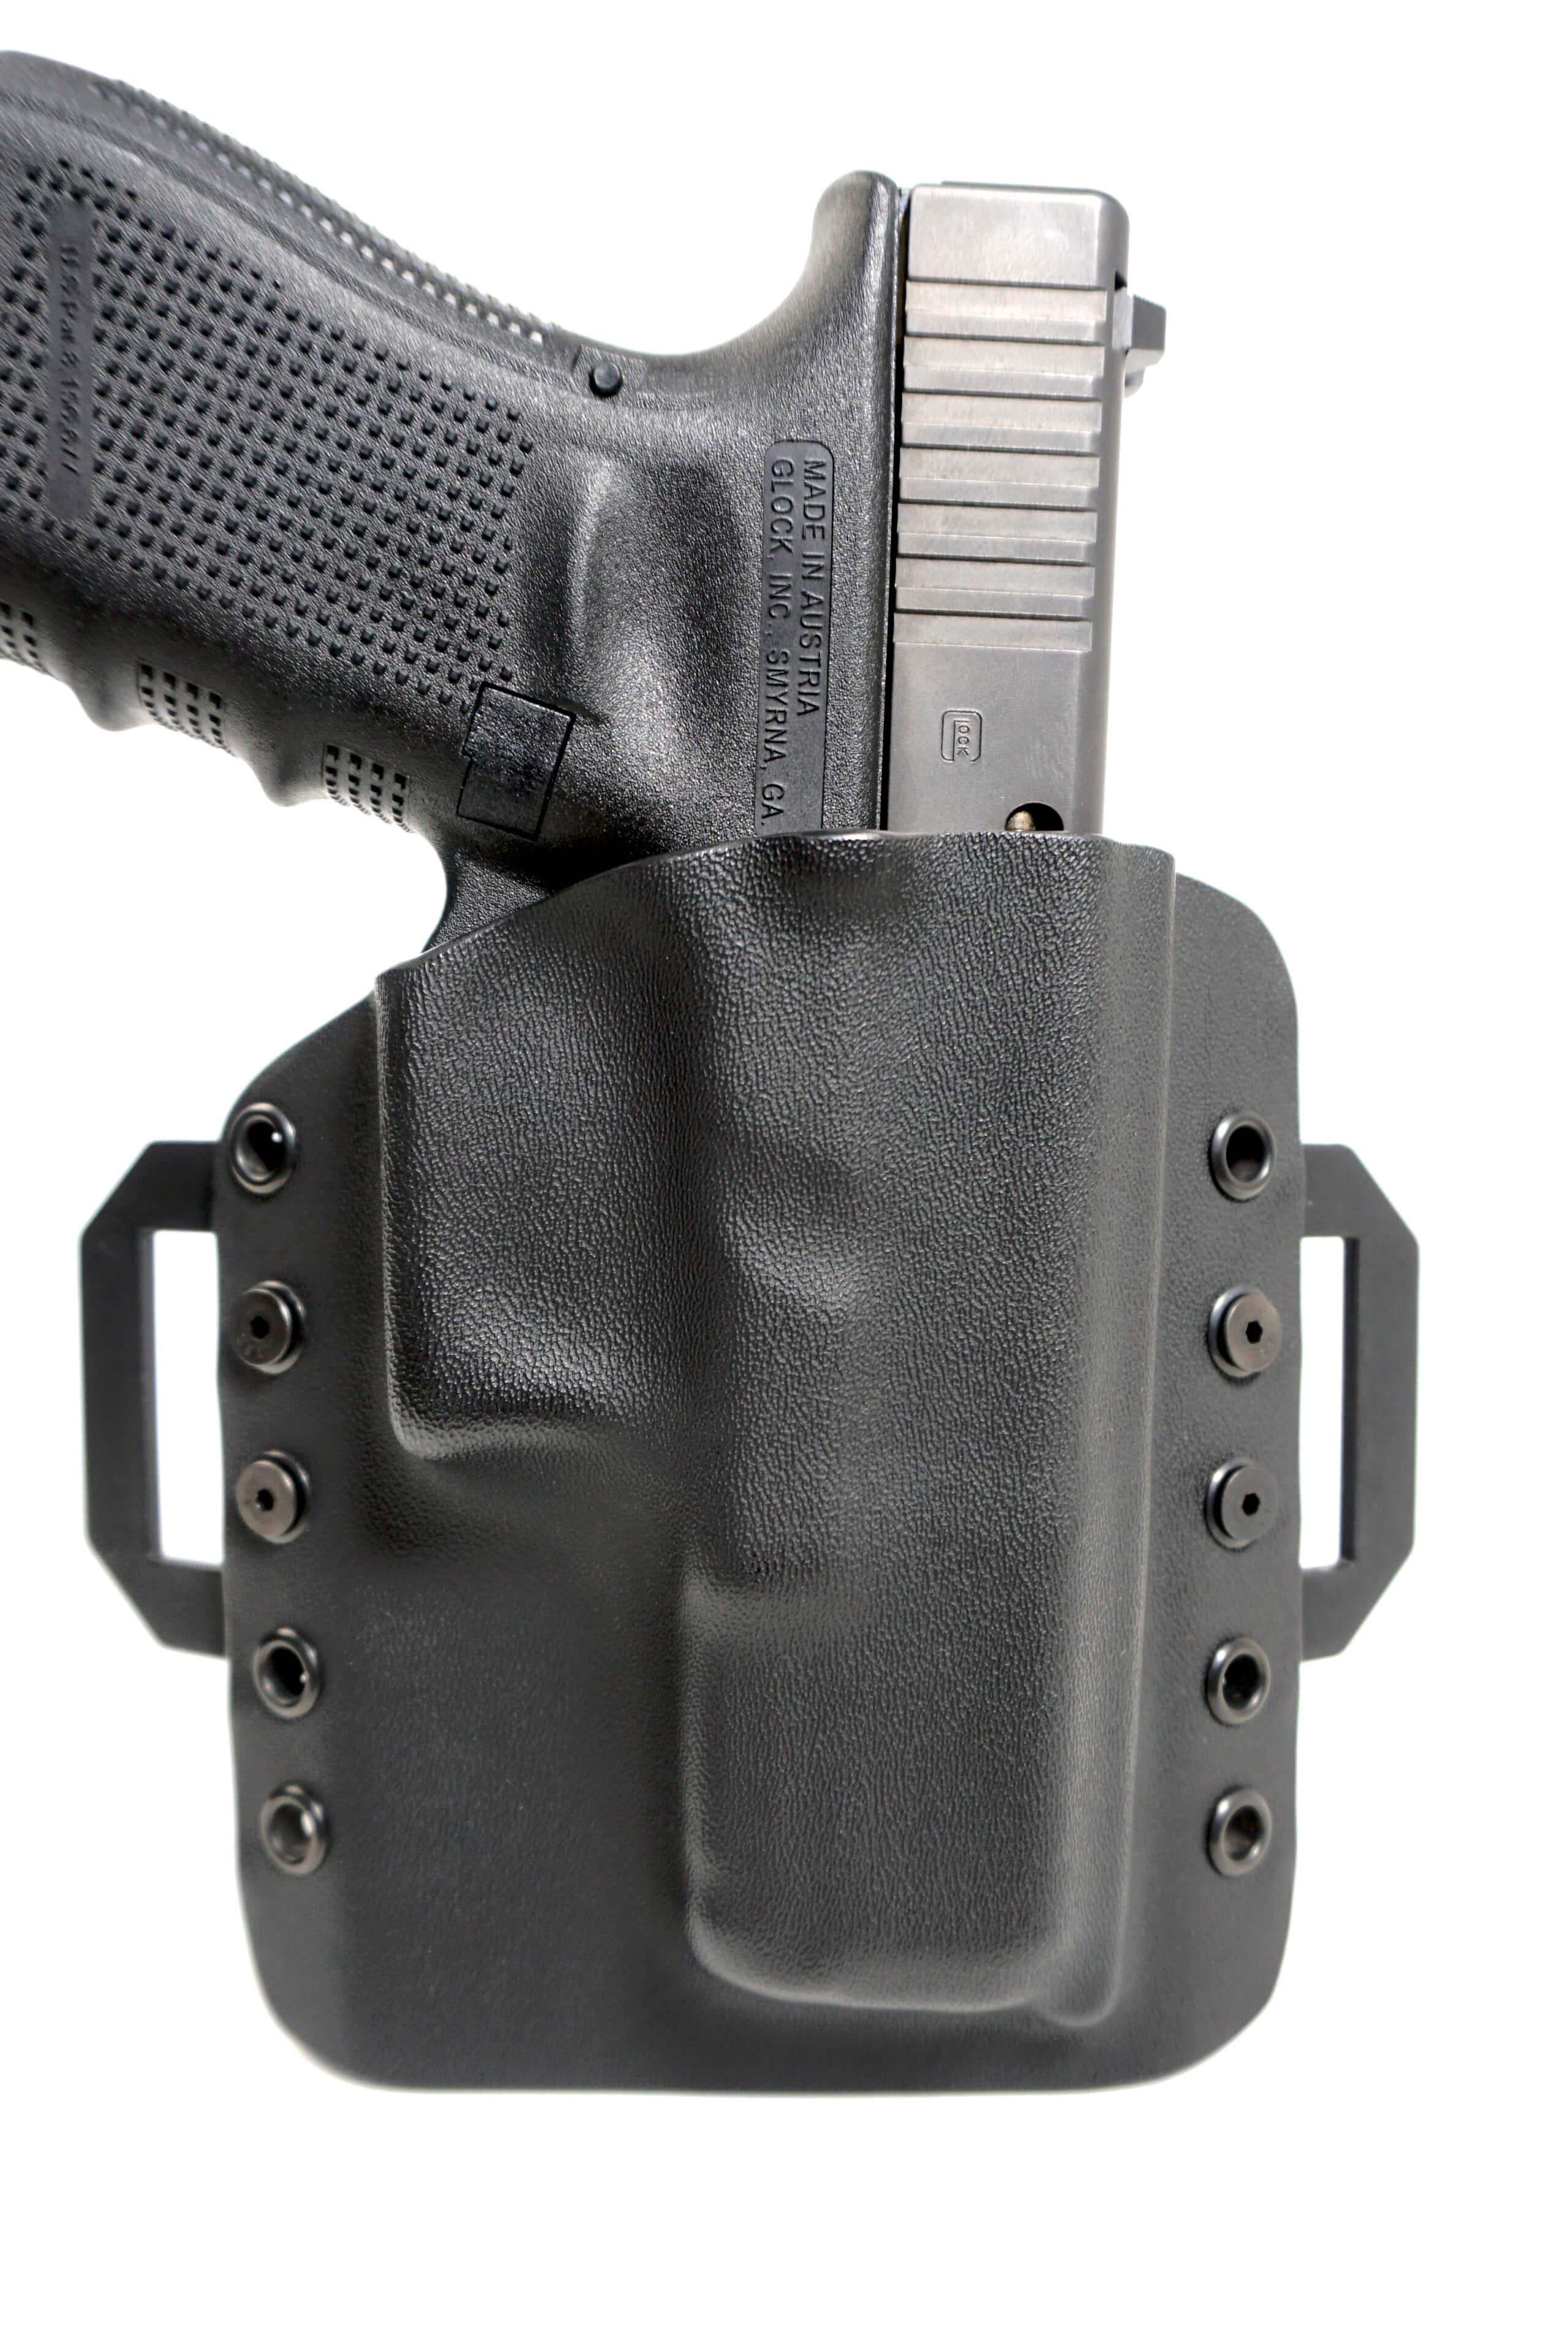 MULTIPLE COLORS AVAILABLE Smith & Wesson OWB KYDEX PADDLE HOLSTER SW 